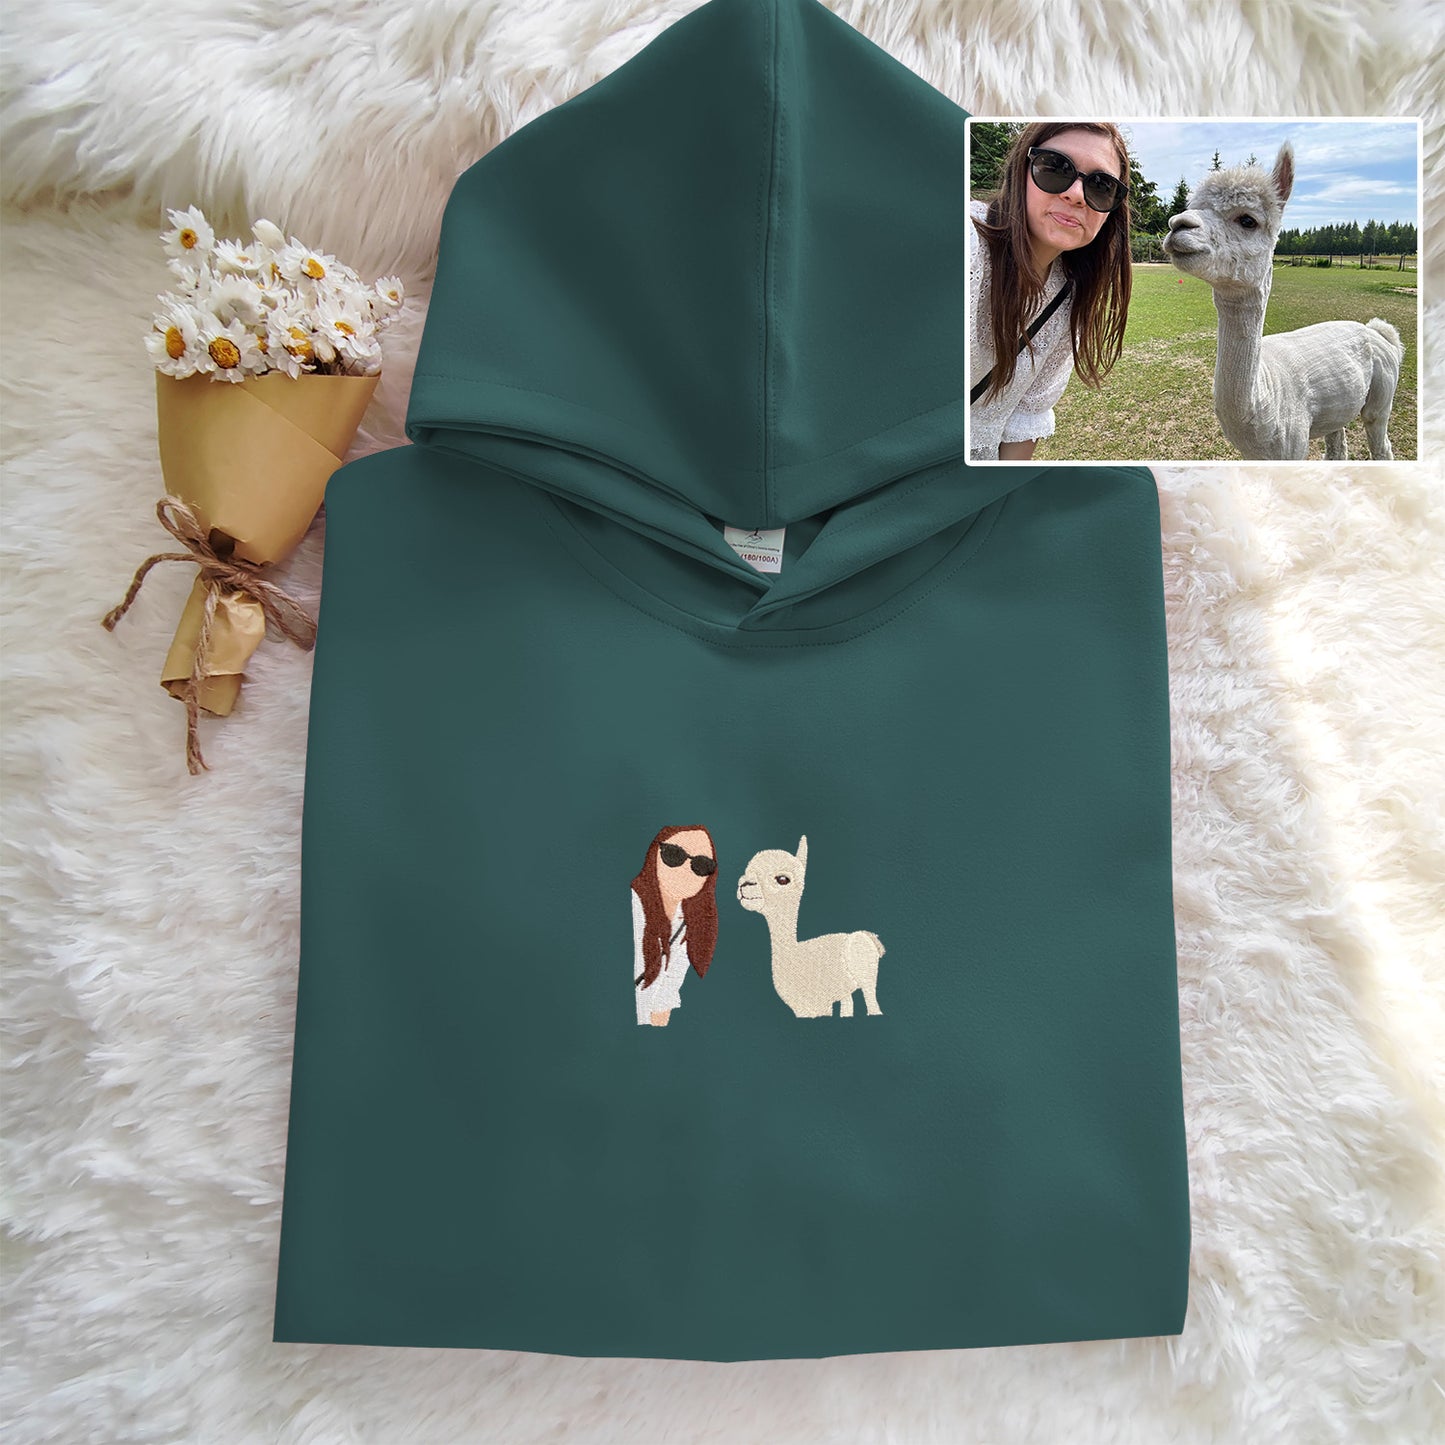 Zoo photo custom embroidered hoodie, personalized best matching hoodie